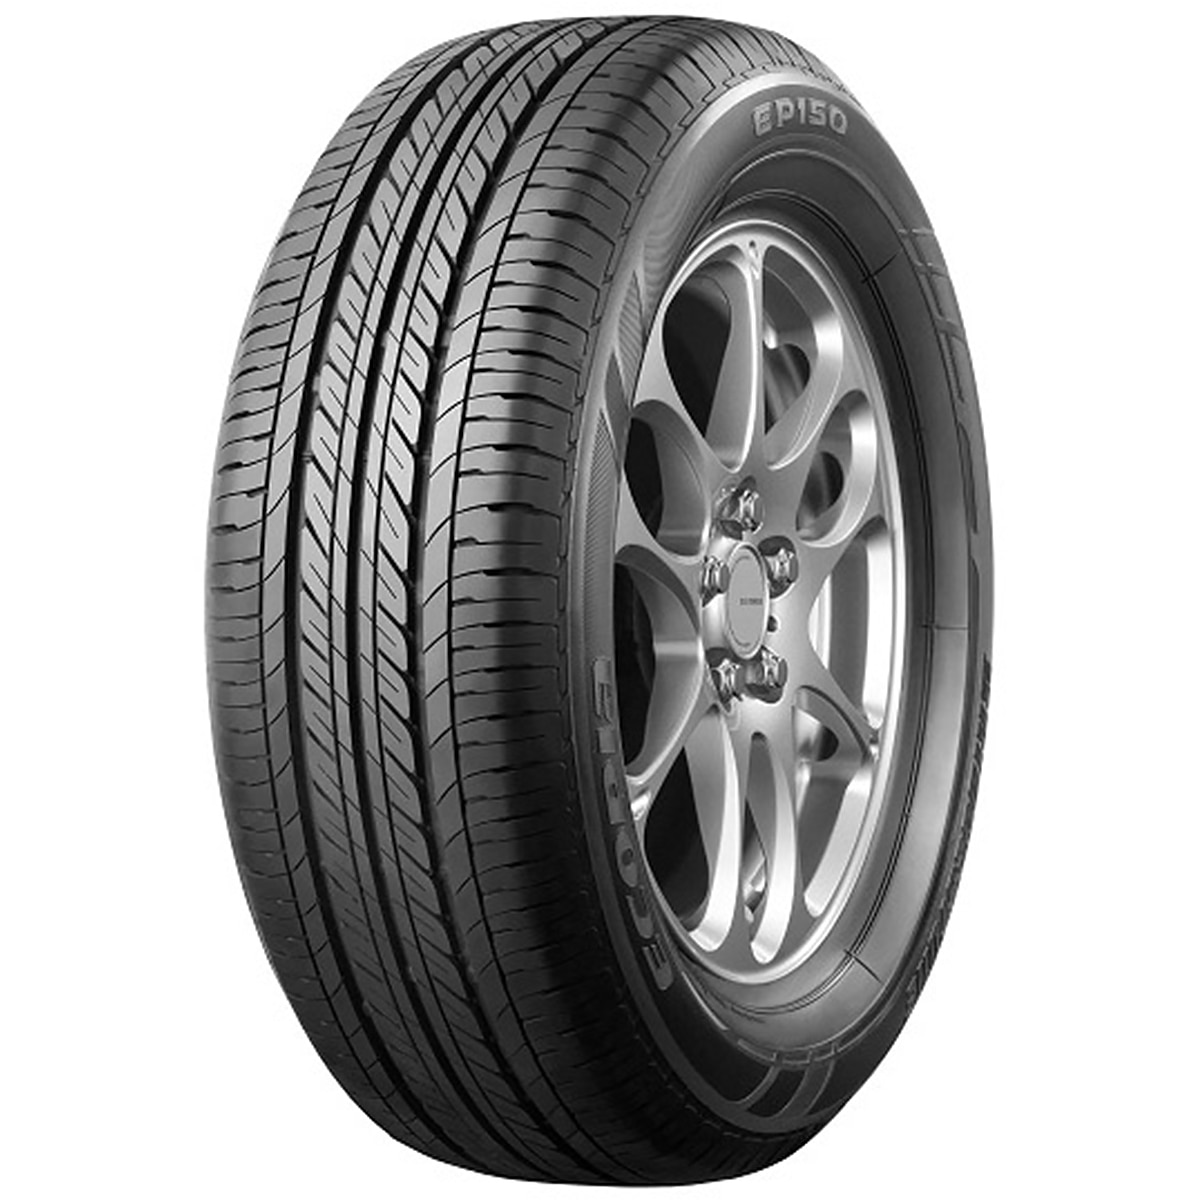 185/55R16 83V BS EP150 - Tyre